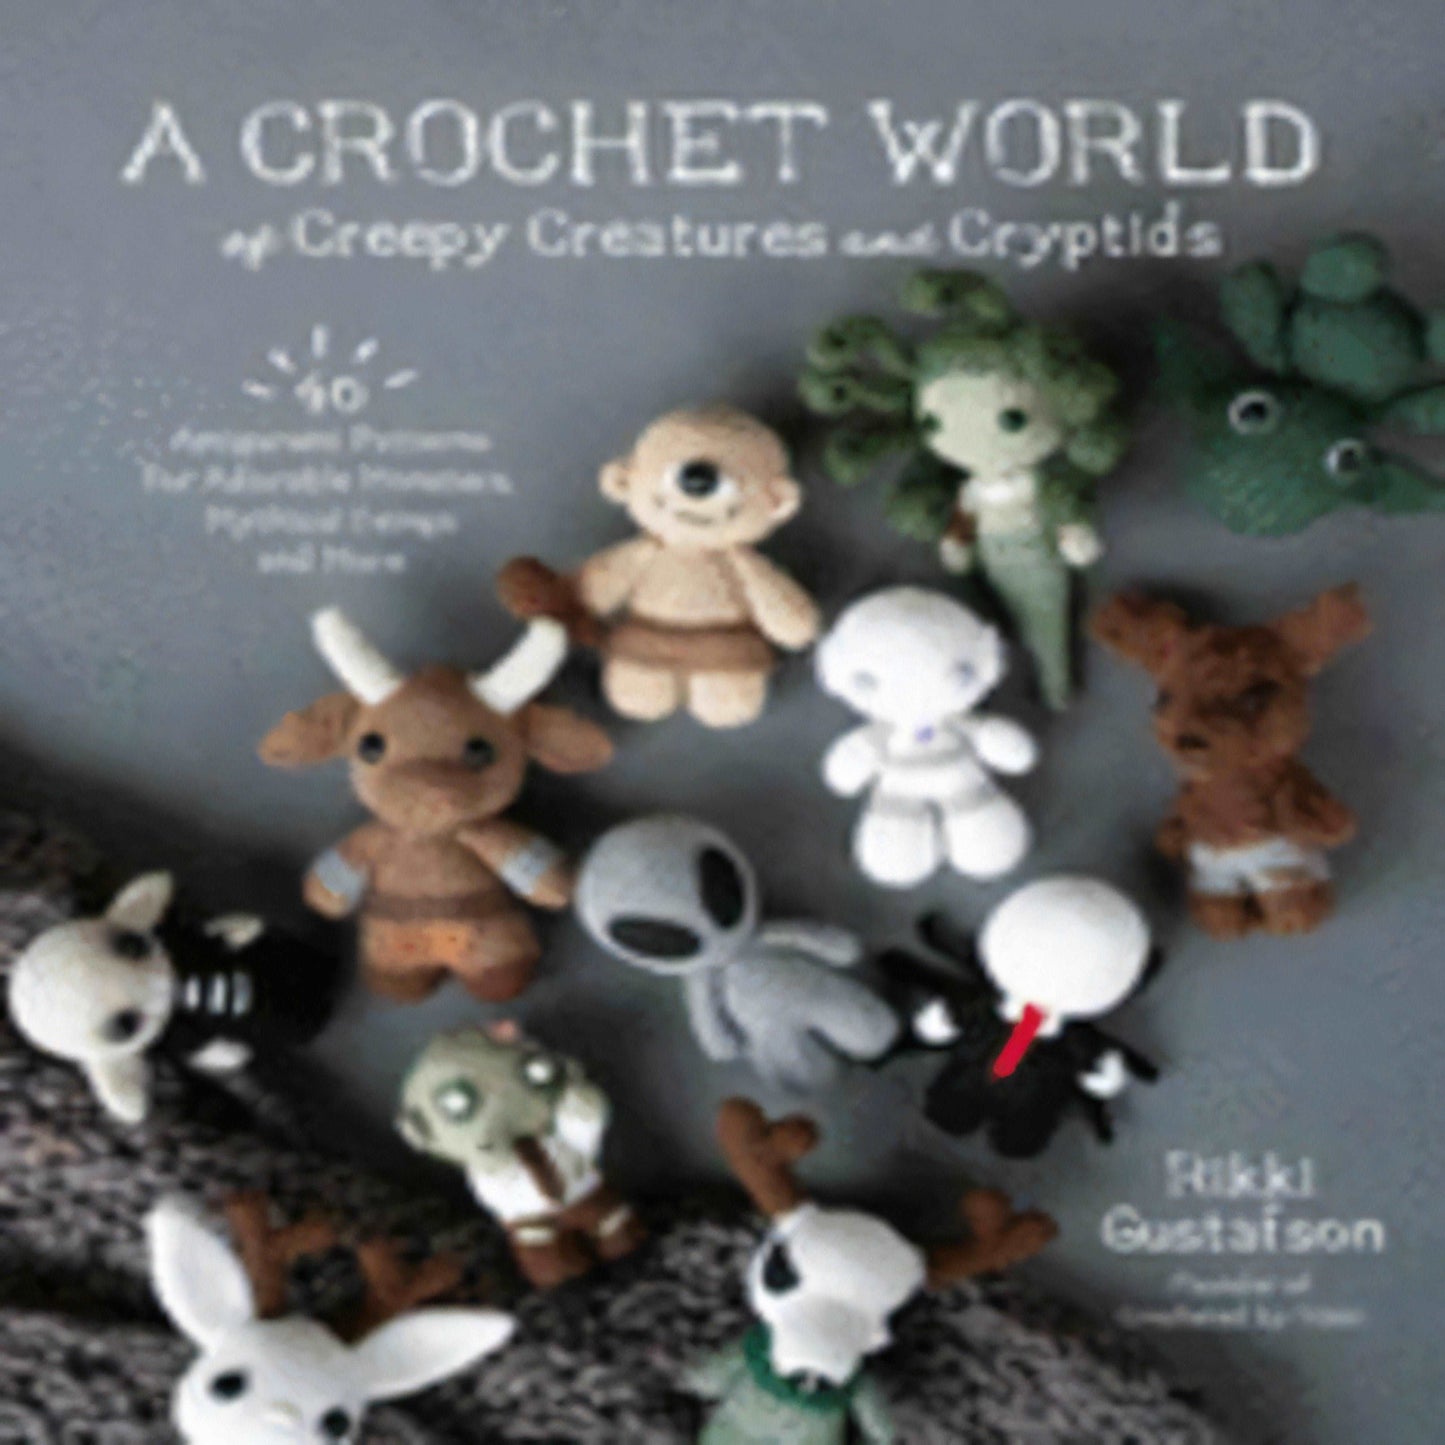 A Crochet World of Creepy Creatures and Cryptids: 40 Amigurumi Patterns for Adorable Monsters, Mythical Beings and More271-032023-1645675386DPGBOOKSTORE.COM. Today's Bestsellers.